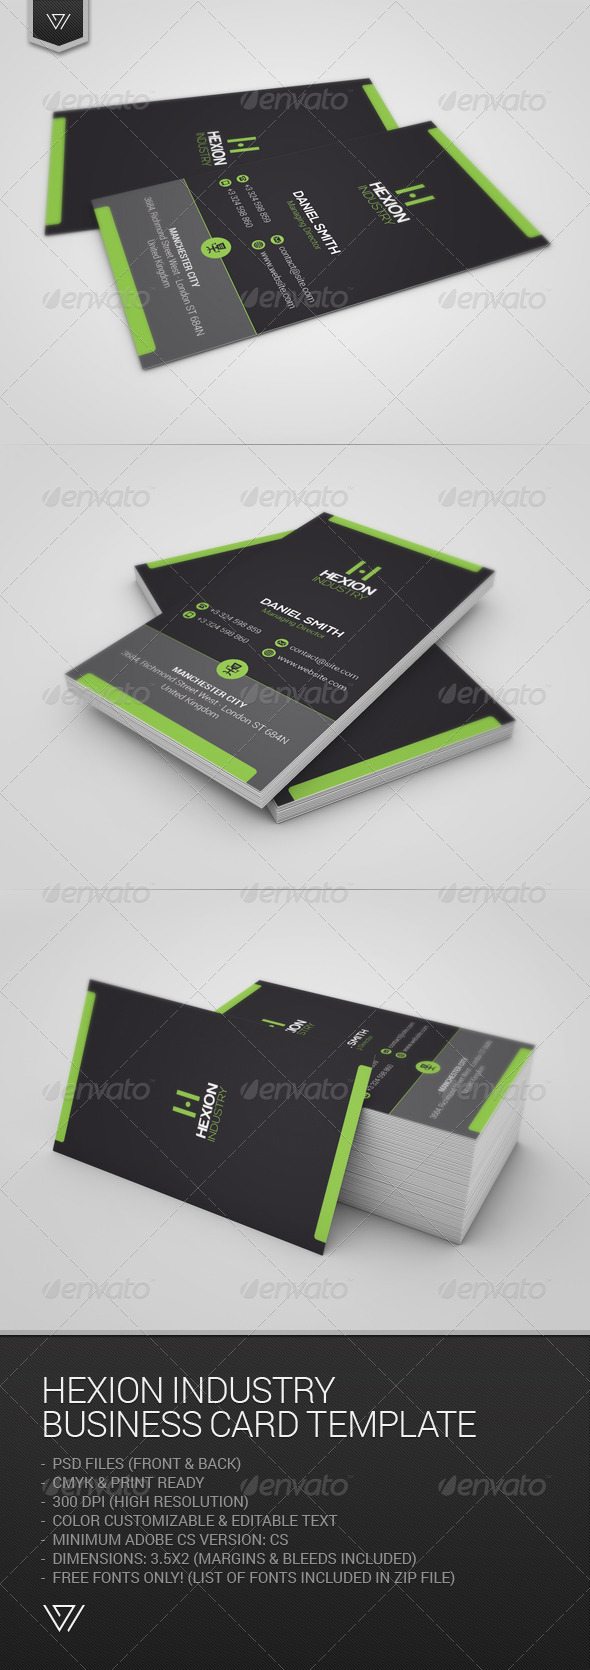 GraphicRiver Hexion Industry Business Card 7663980